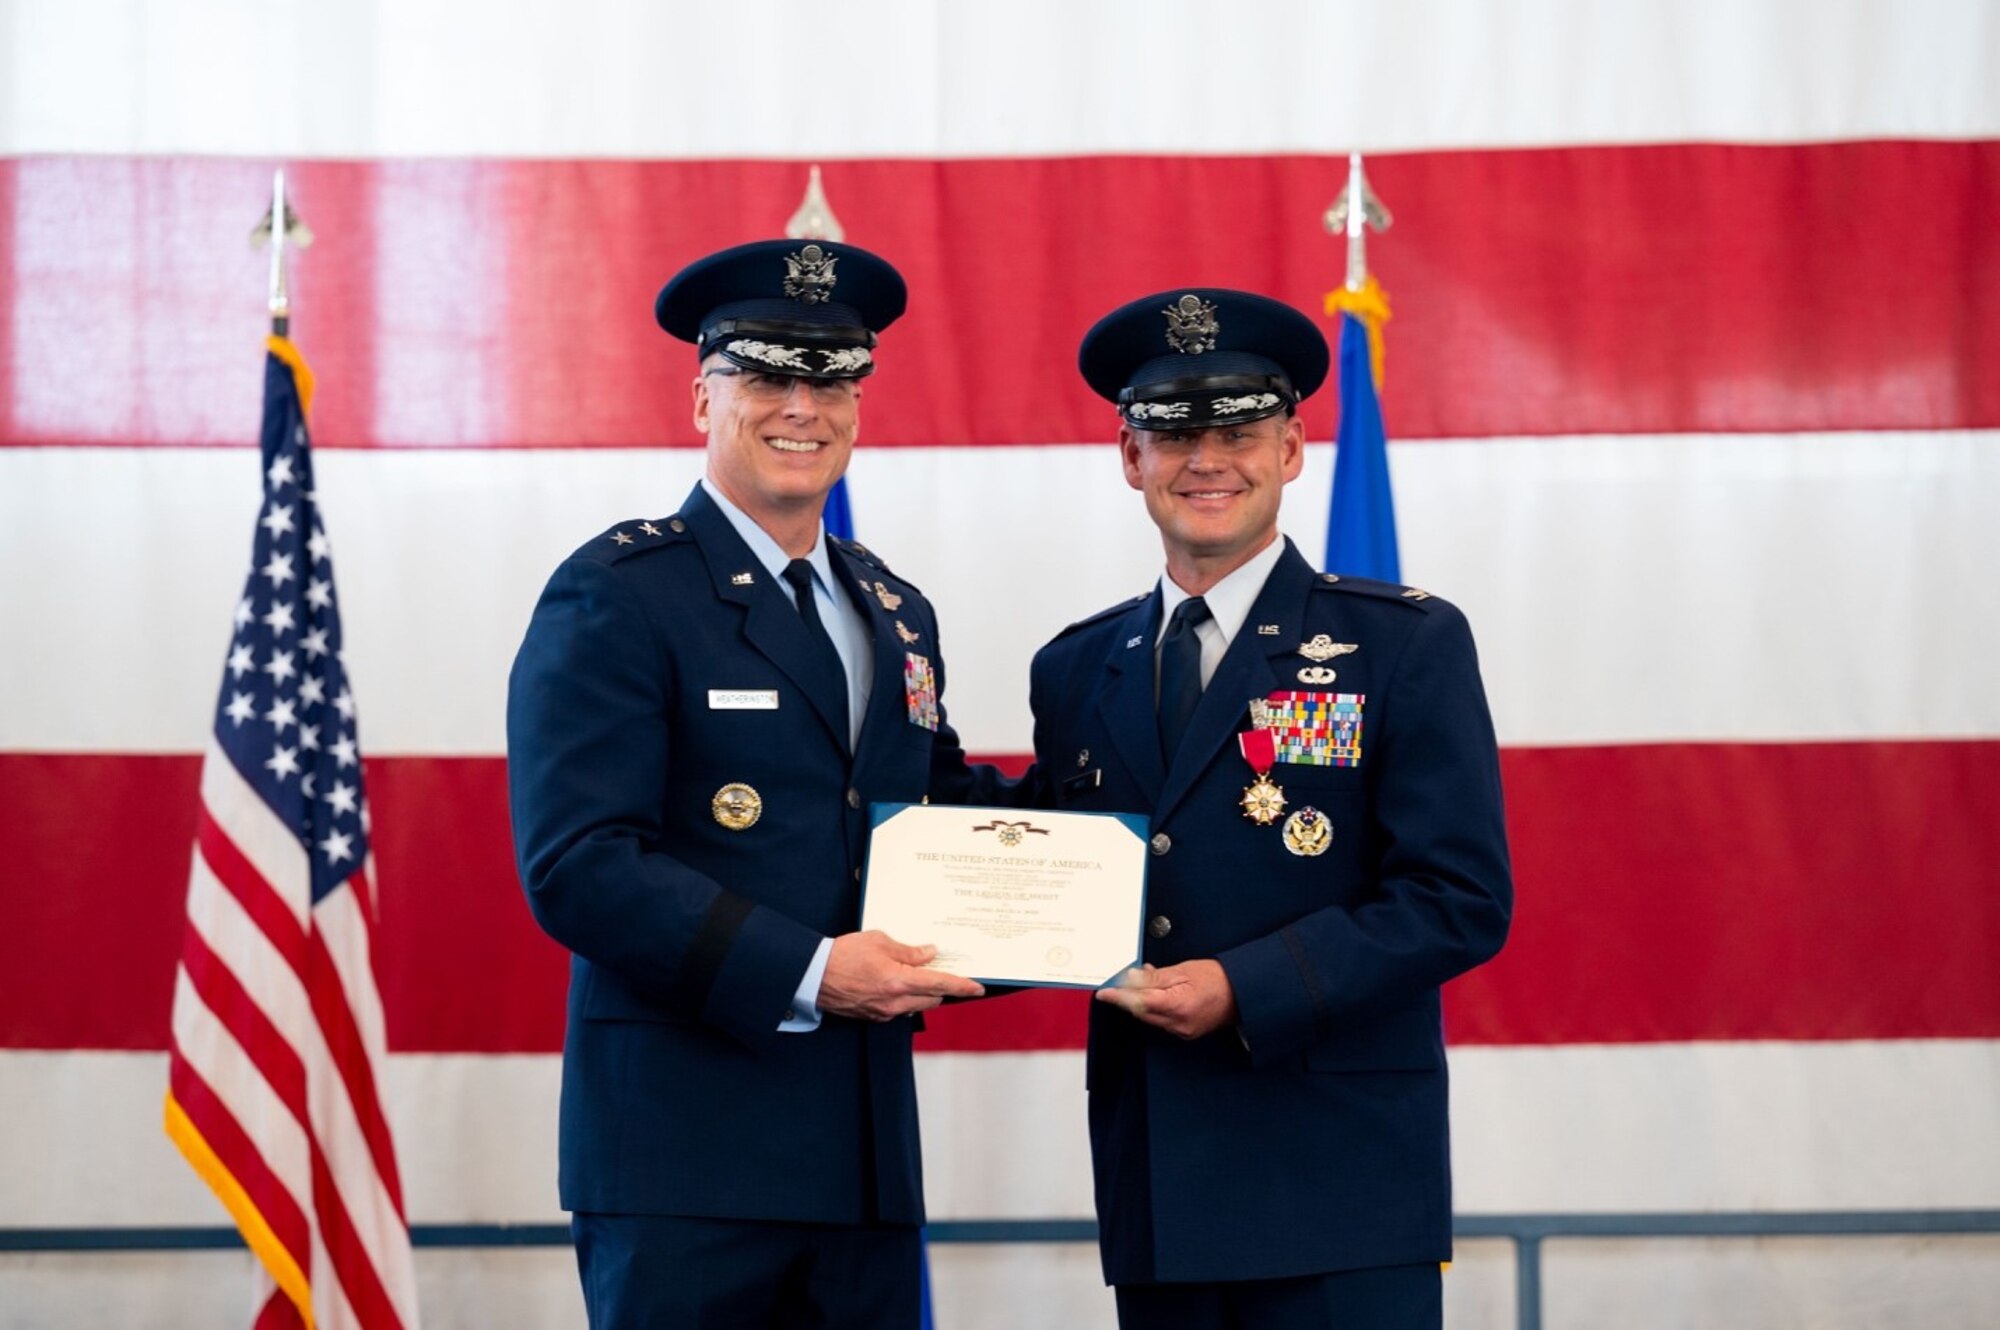 Maj. Gen. Mark E. Weatherington, 8th Air Force and Joint-Global Strike Operations Center commander, presents Col. David A. Doss, the outgoing 28th Bomb Wing commander, with the Legion of Merit during the 28th BW change of command ceremony at Ellsworth Air Force Base, S.D., June 18, 2021.